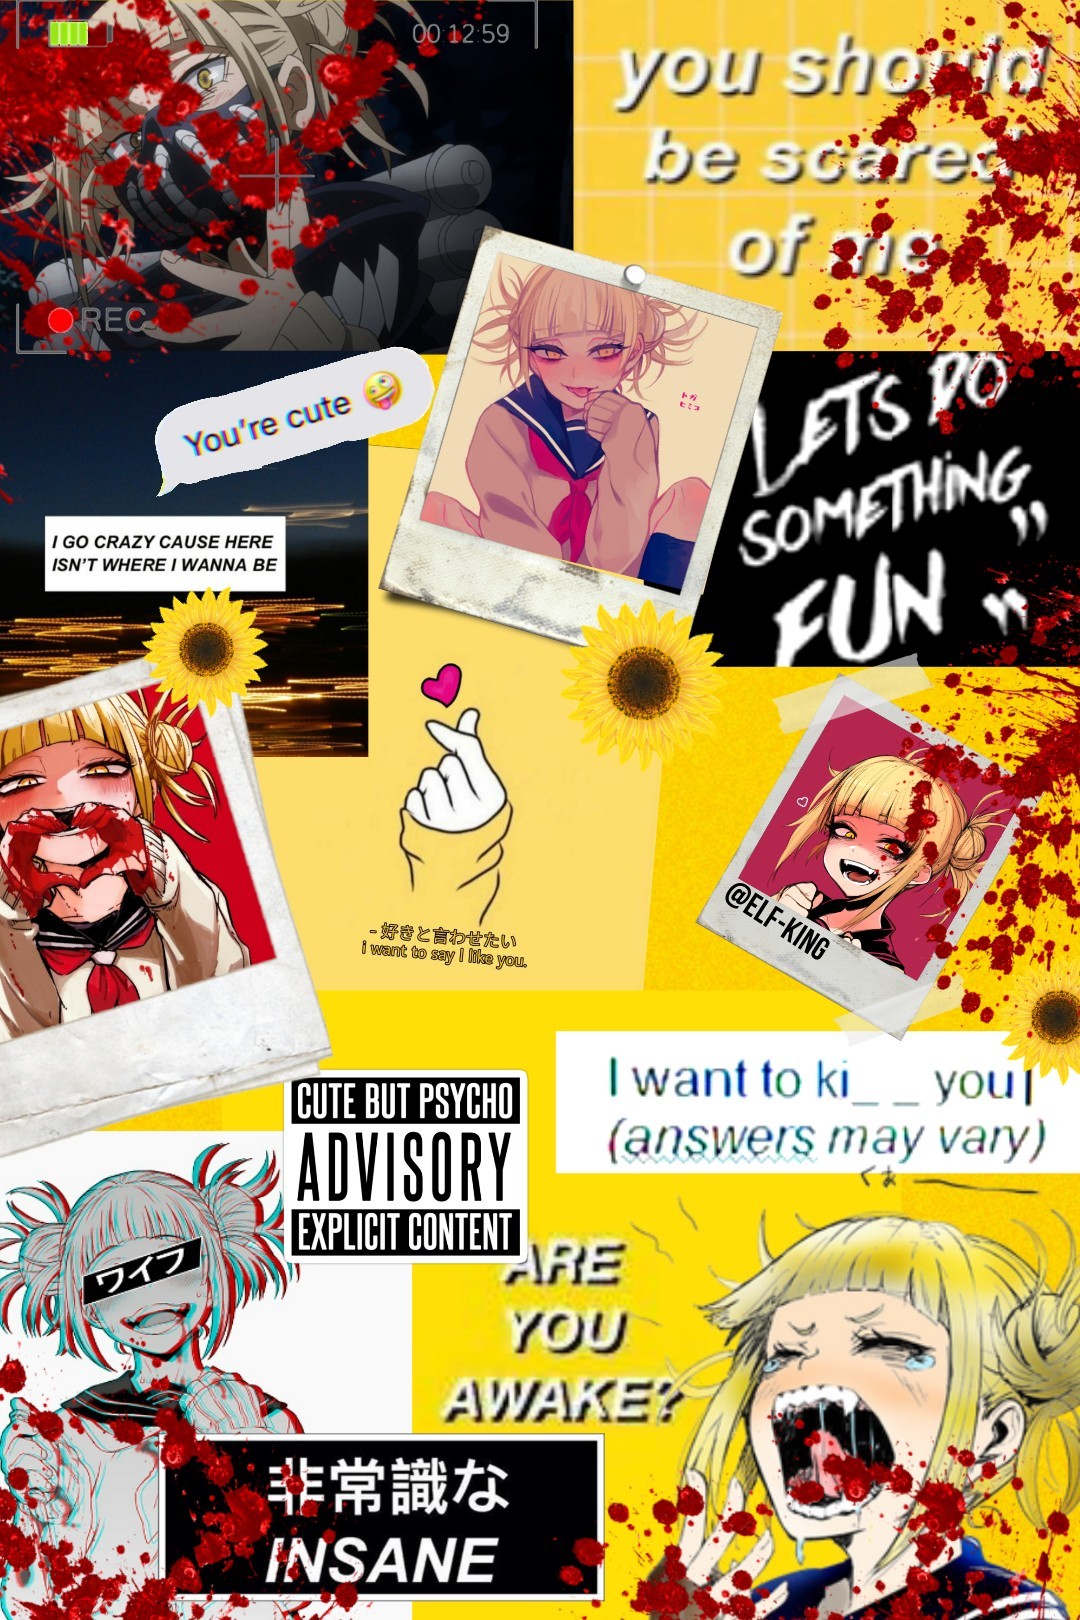 ~💛toga aesthetic 💛~
I made this for my sister because she's obsessed with Toga. Remix any other characters you want me to do!